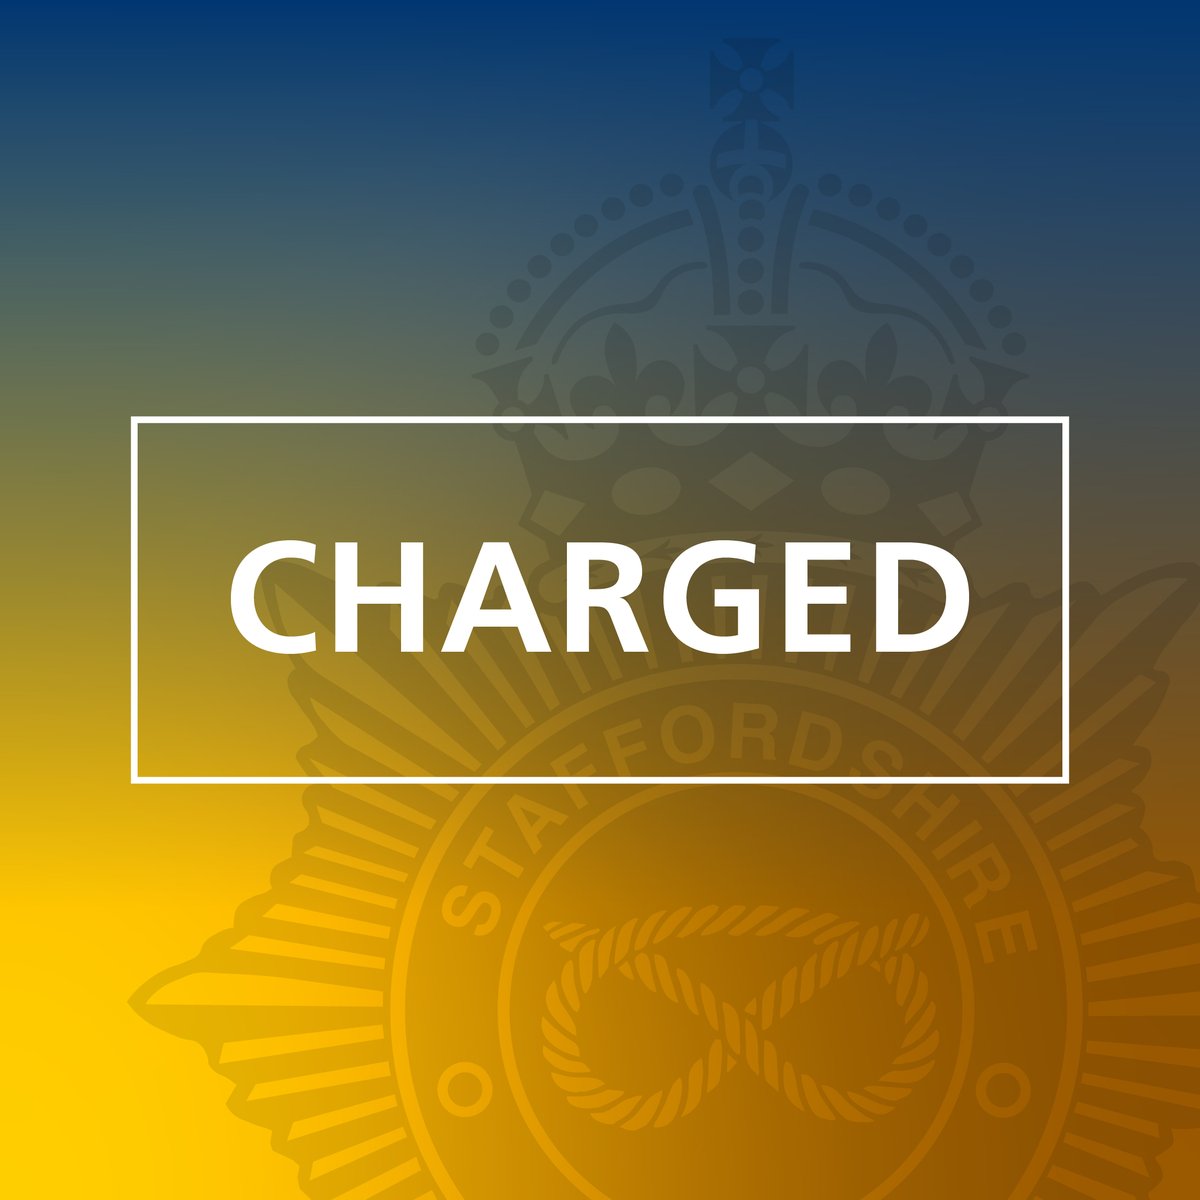 A man has been charged with vehicle theft and burglary offences following incidents in south Staffordshire and the West Midlands area. Read more here: orlo.uk/4k6je